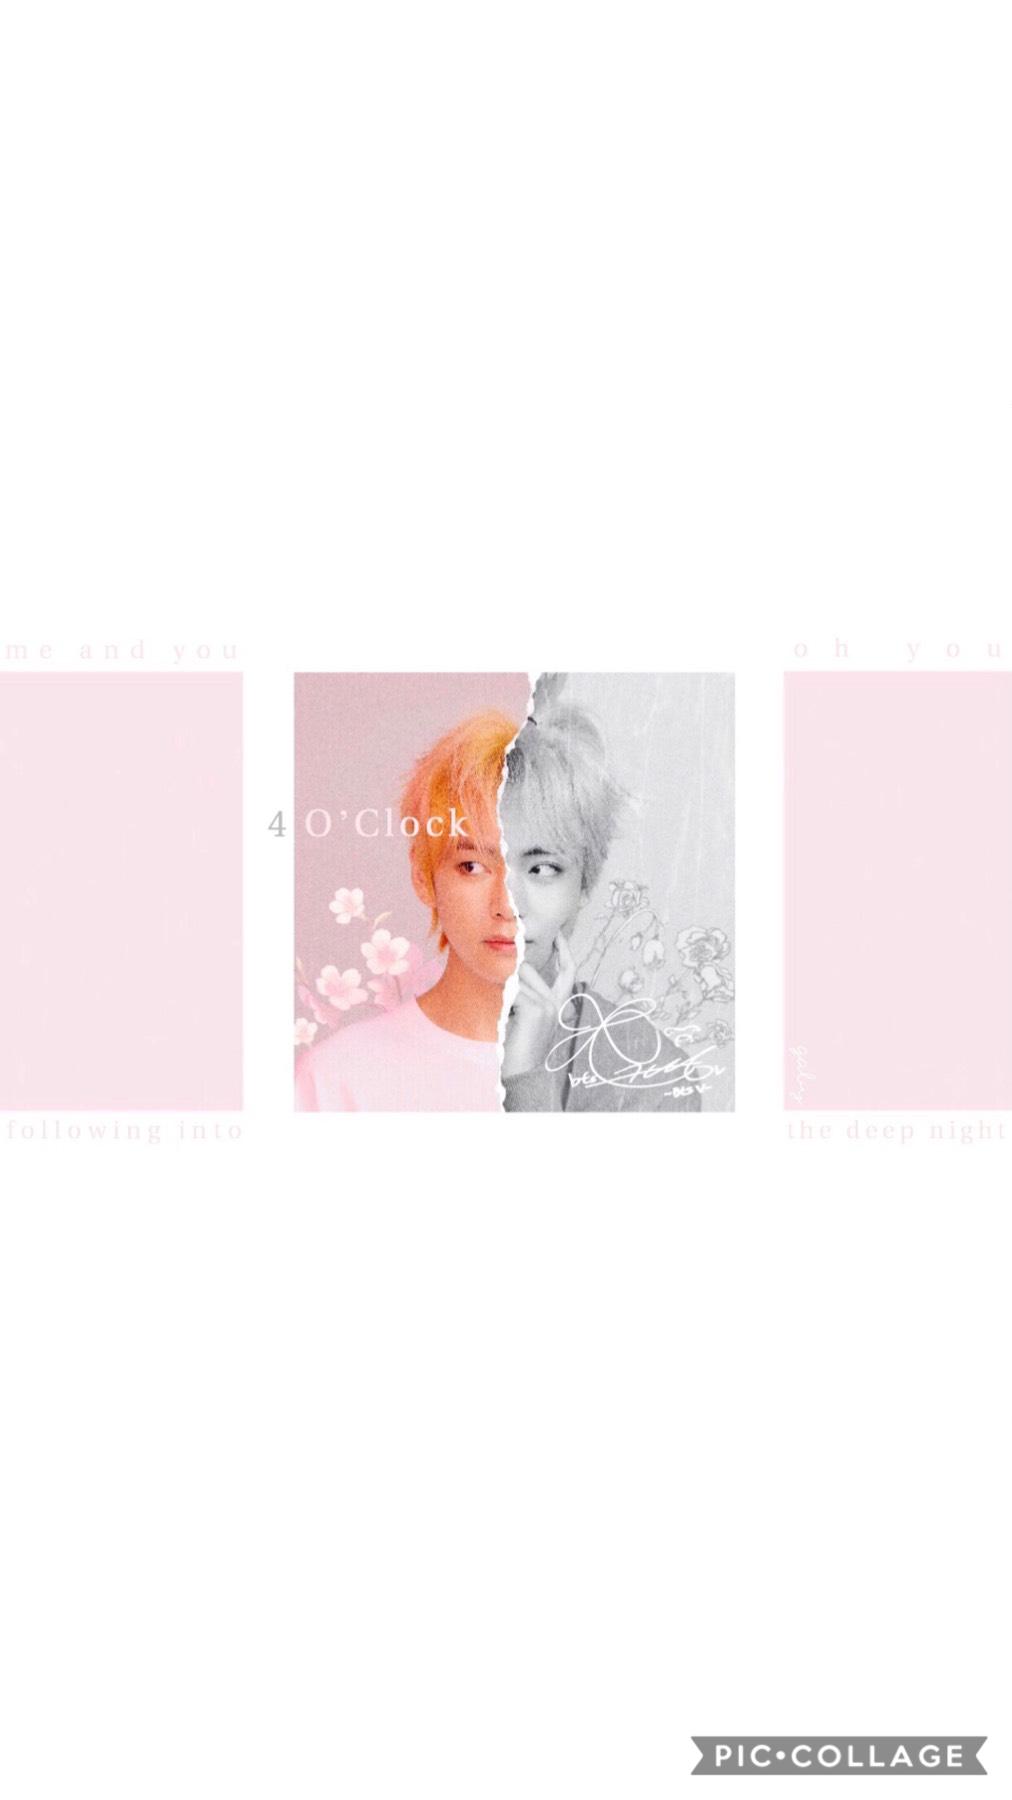 tap 💕☁️
brO I’m so excited for bangtan’s comeback I’m noT ReaDy 
💗 THIS EDIT WAS MADE BECAUSE I LOVE TAEHYUNG’S LIL PONYTAIL OMG AAAA UWU 💗
also stream epiphany and shoot me okay thnx bye ly